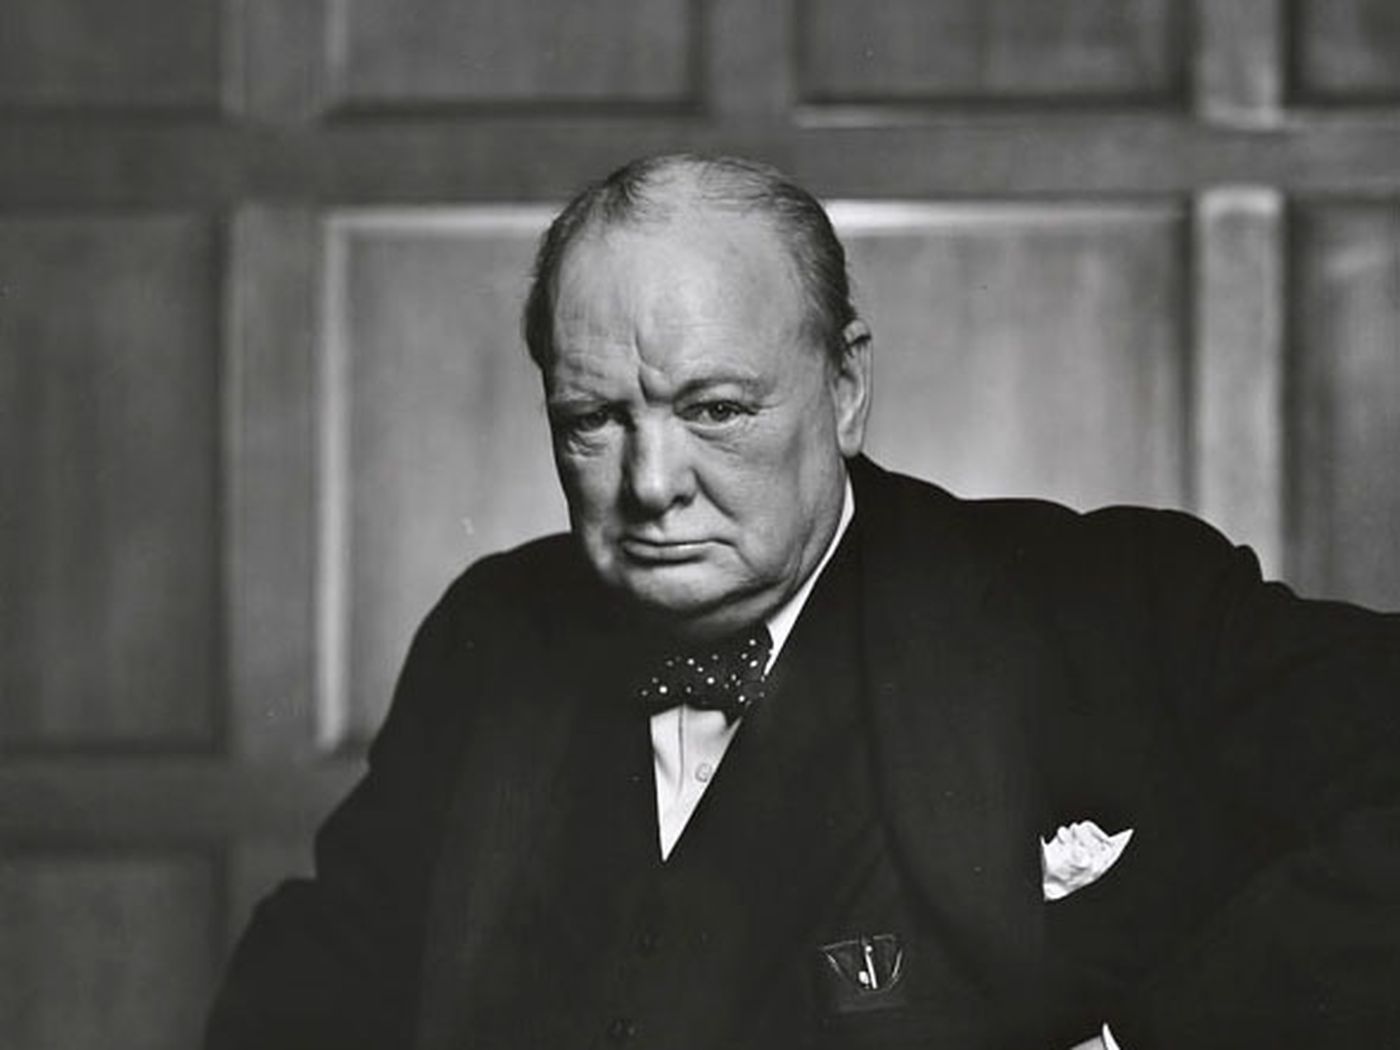 Lost Winston Churchill essay reveals his thoughts on alien life - The Verge